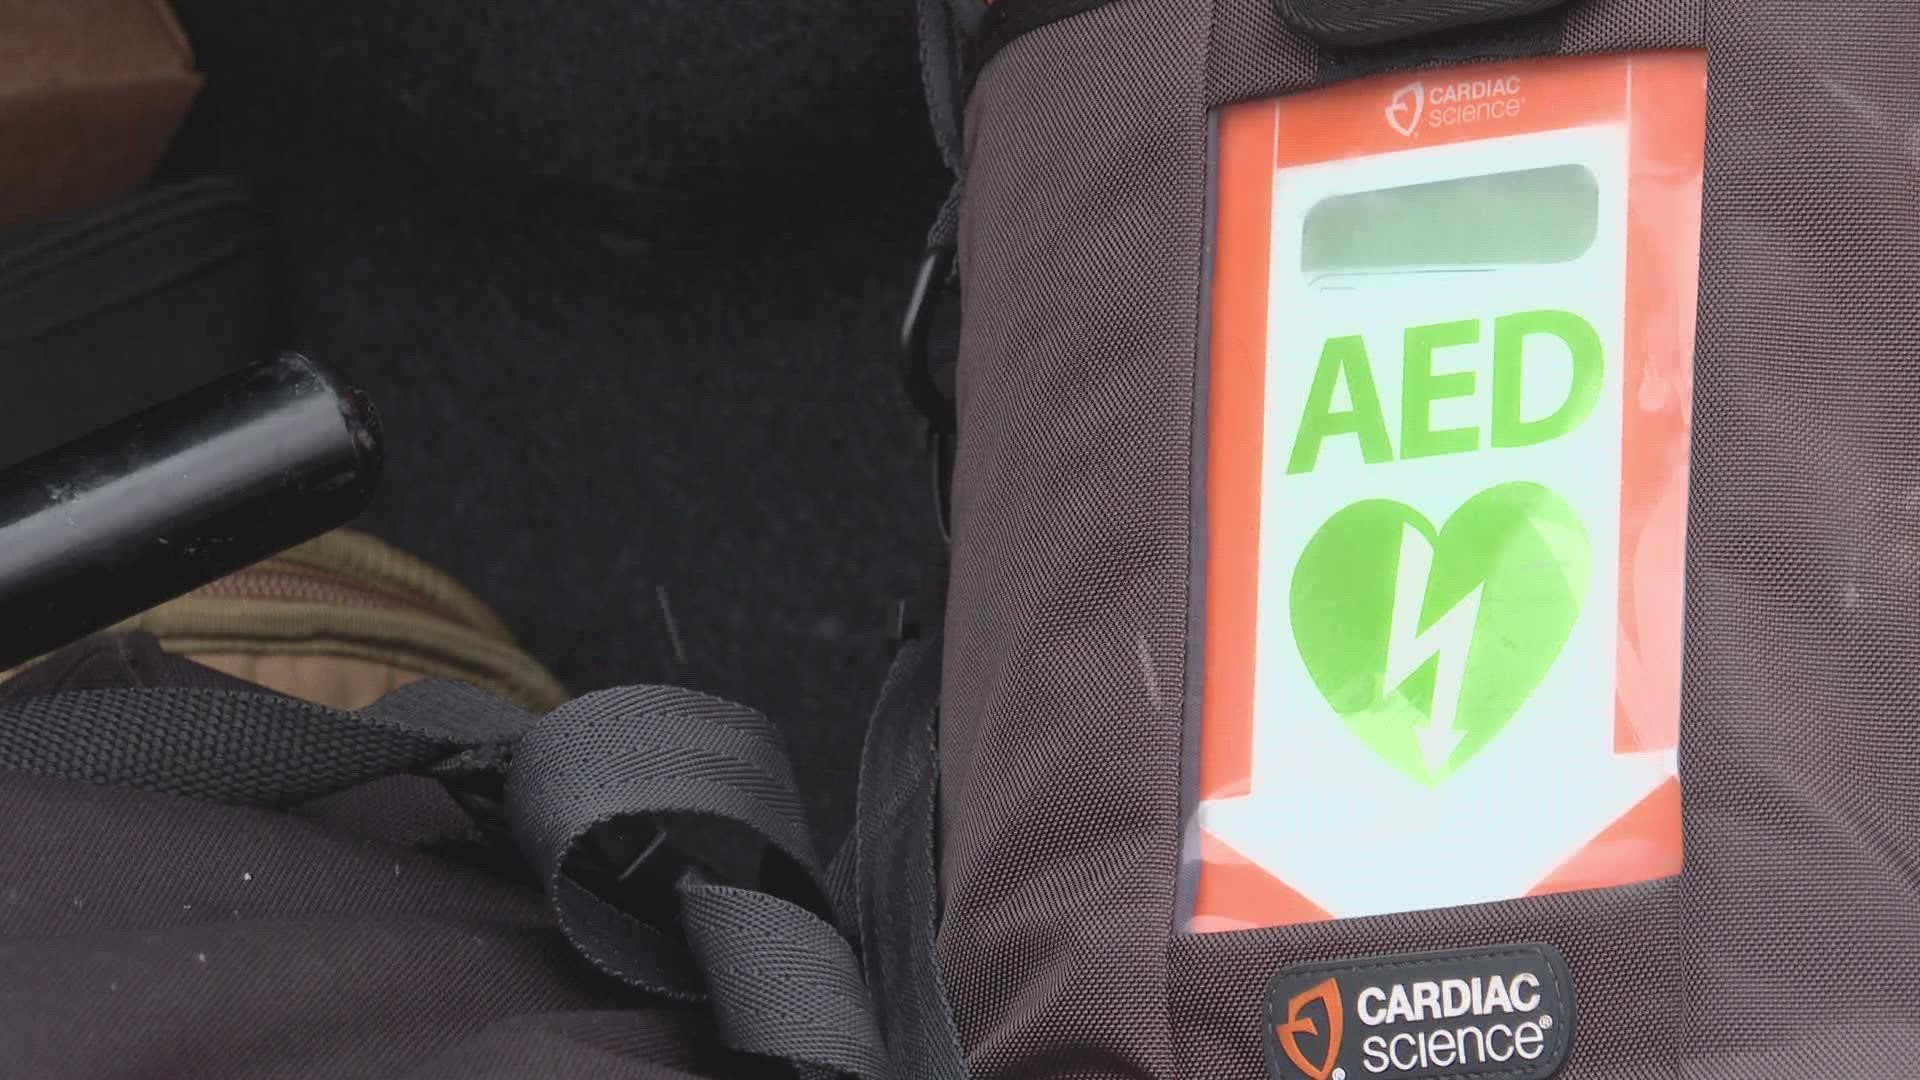 By making AEDs more accessible, police say it lets them provide lifesaving care more quickly.